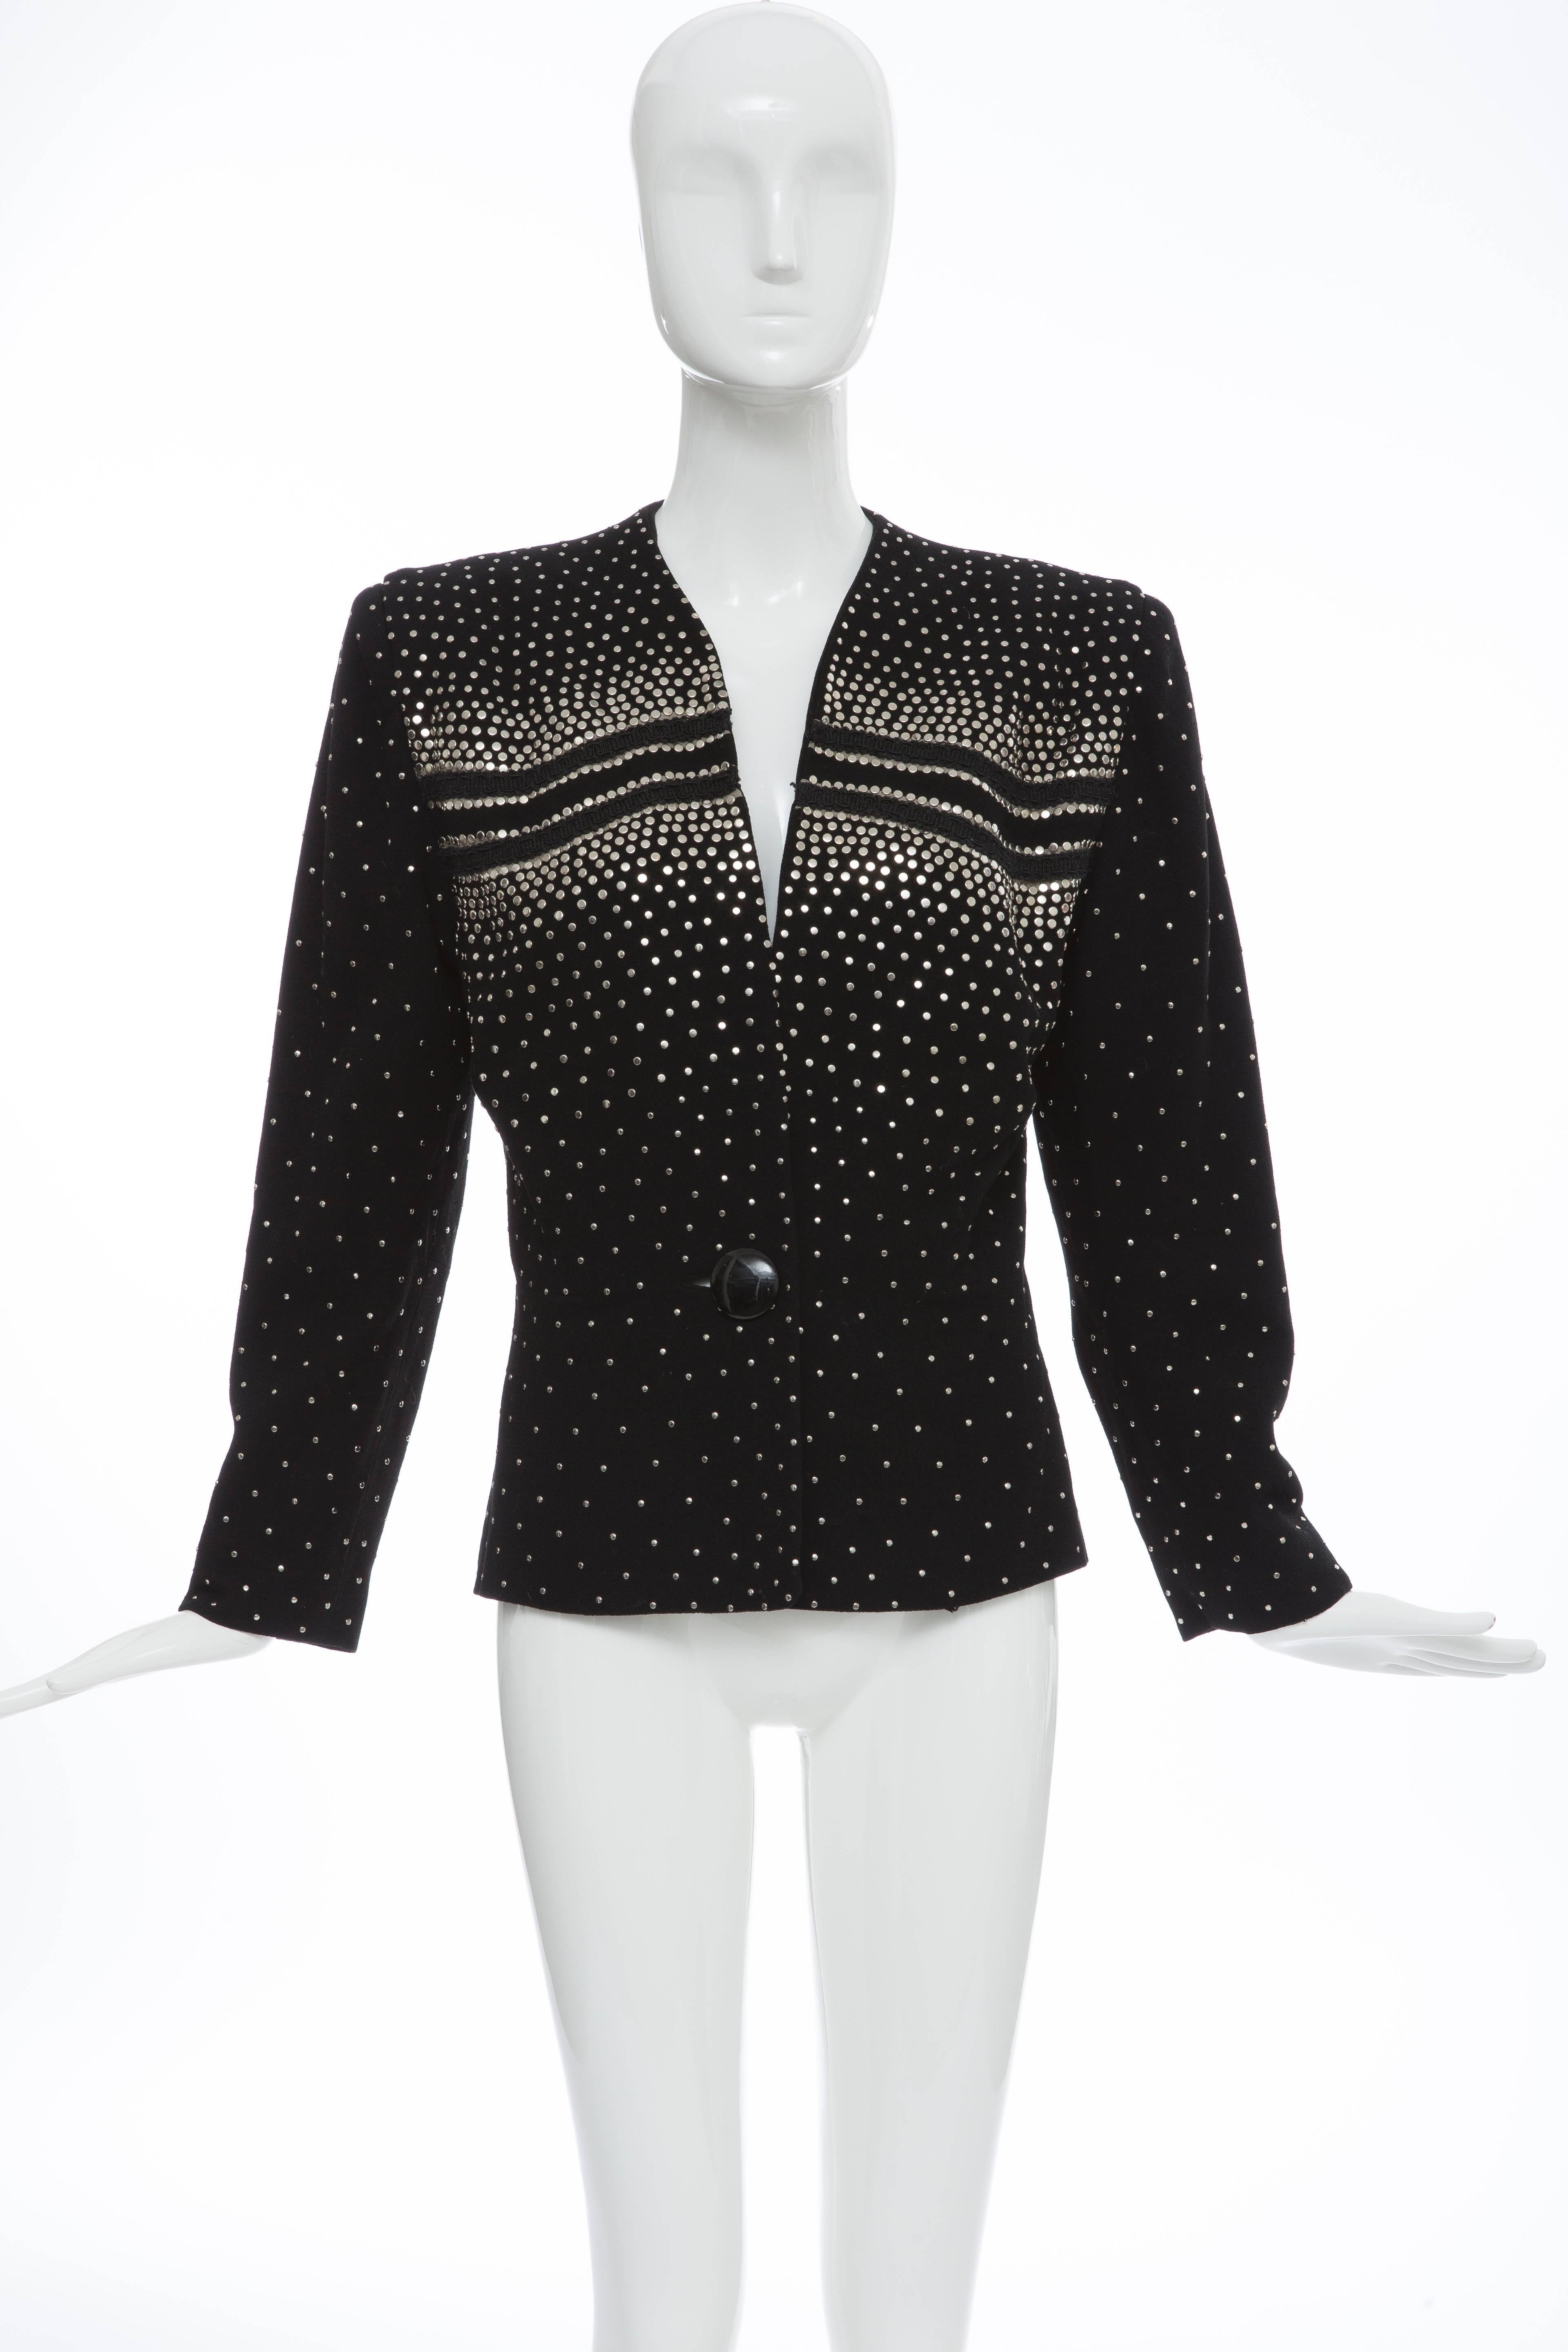 Fred A. Block, circa 1940's, button front, fully lined, silver metal studded black wool crepe jacket.

Bust 40, Waist 32, Length 25